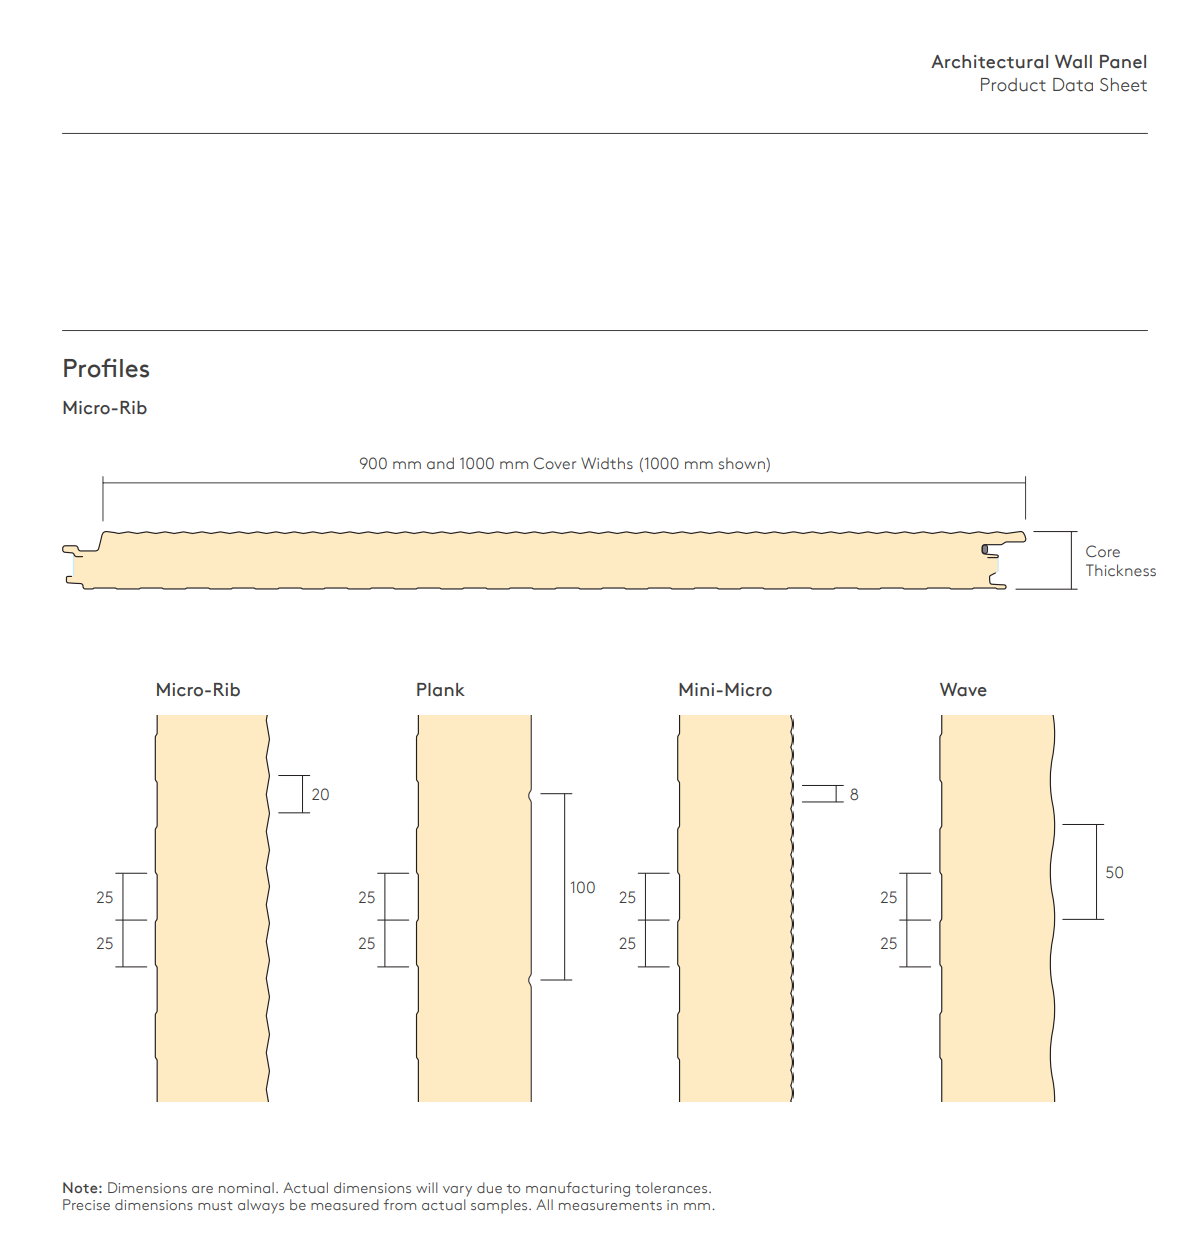 Kingspan Architectural Wall Panel profiles and dimensions